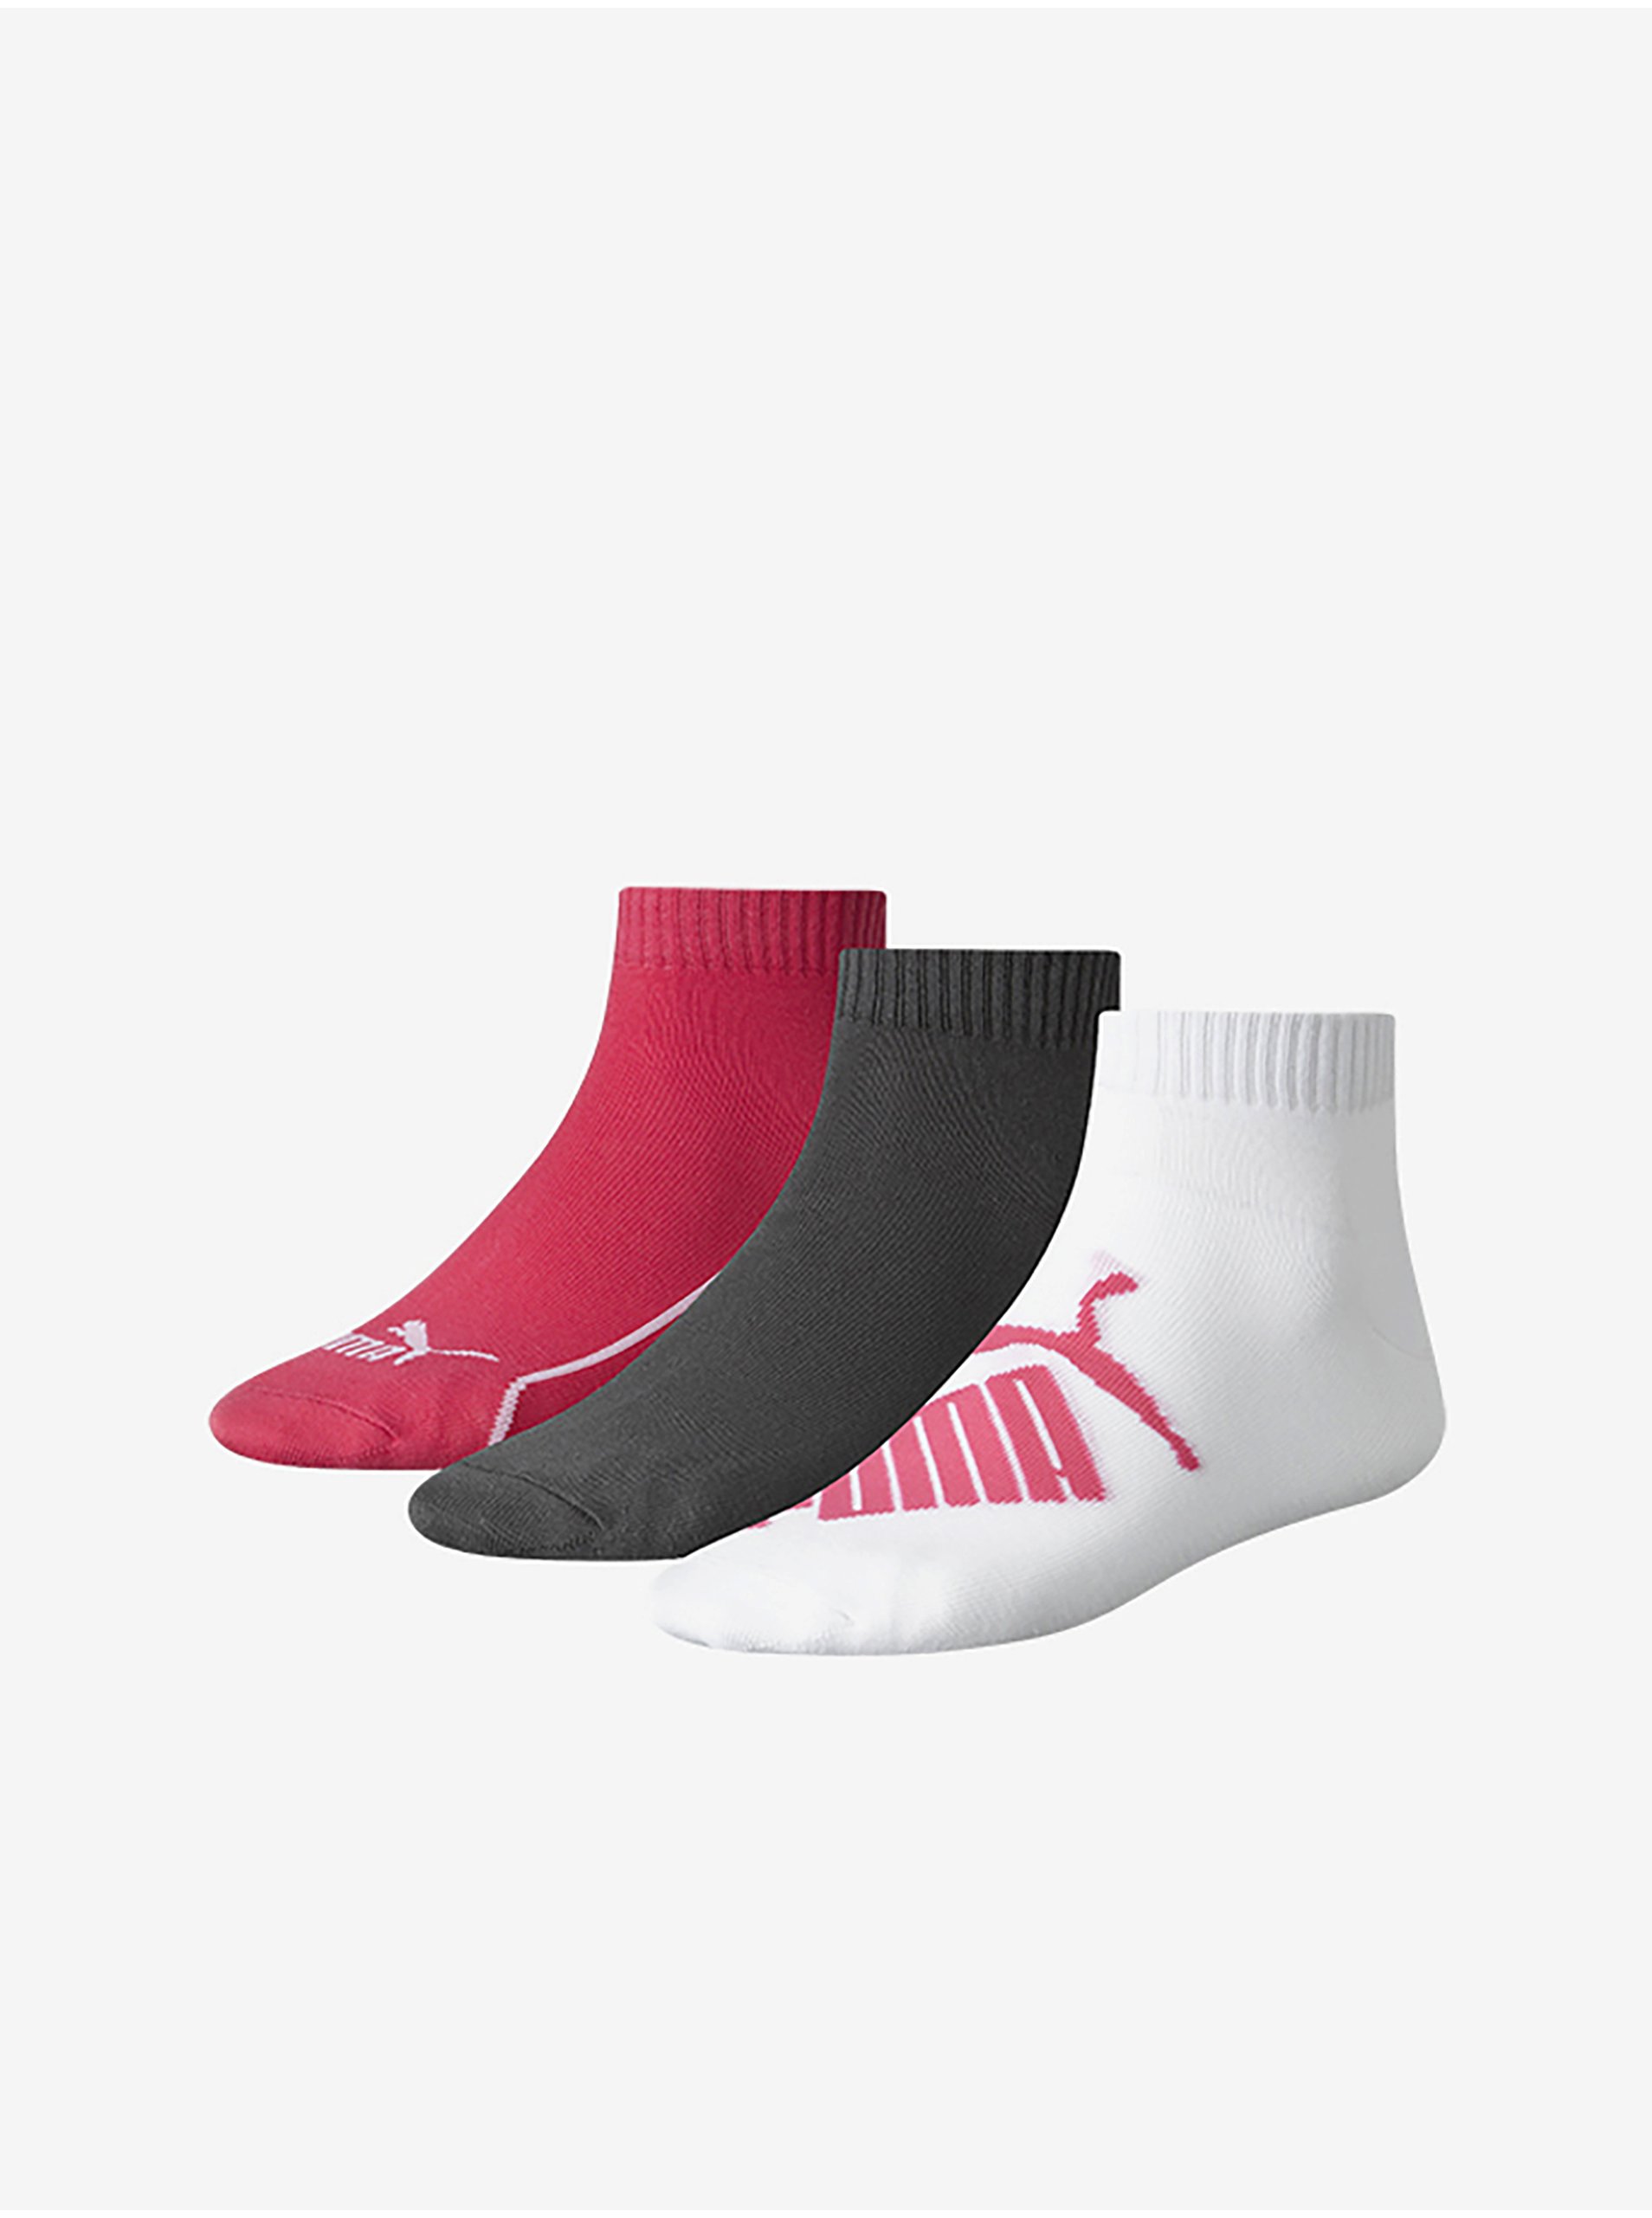 Set of three pairs of socks in deep pink, gray and white Puma - Men